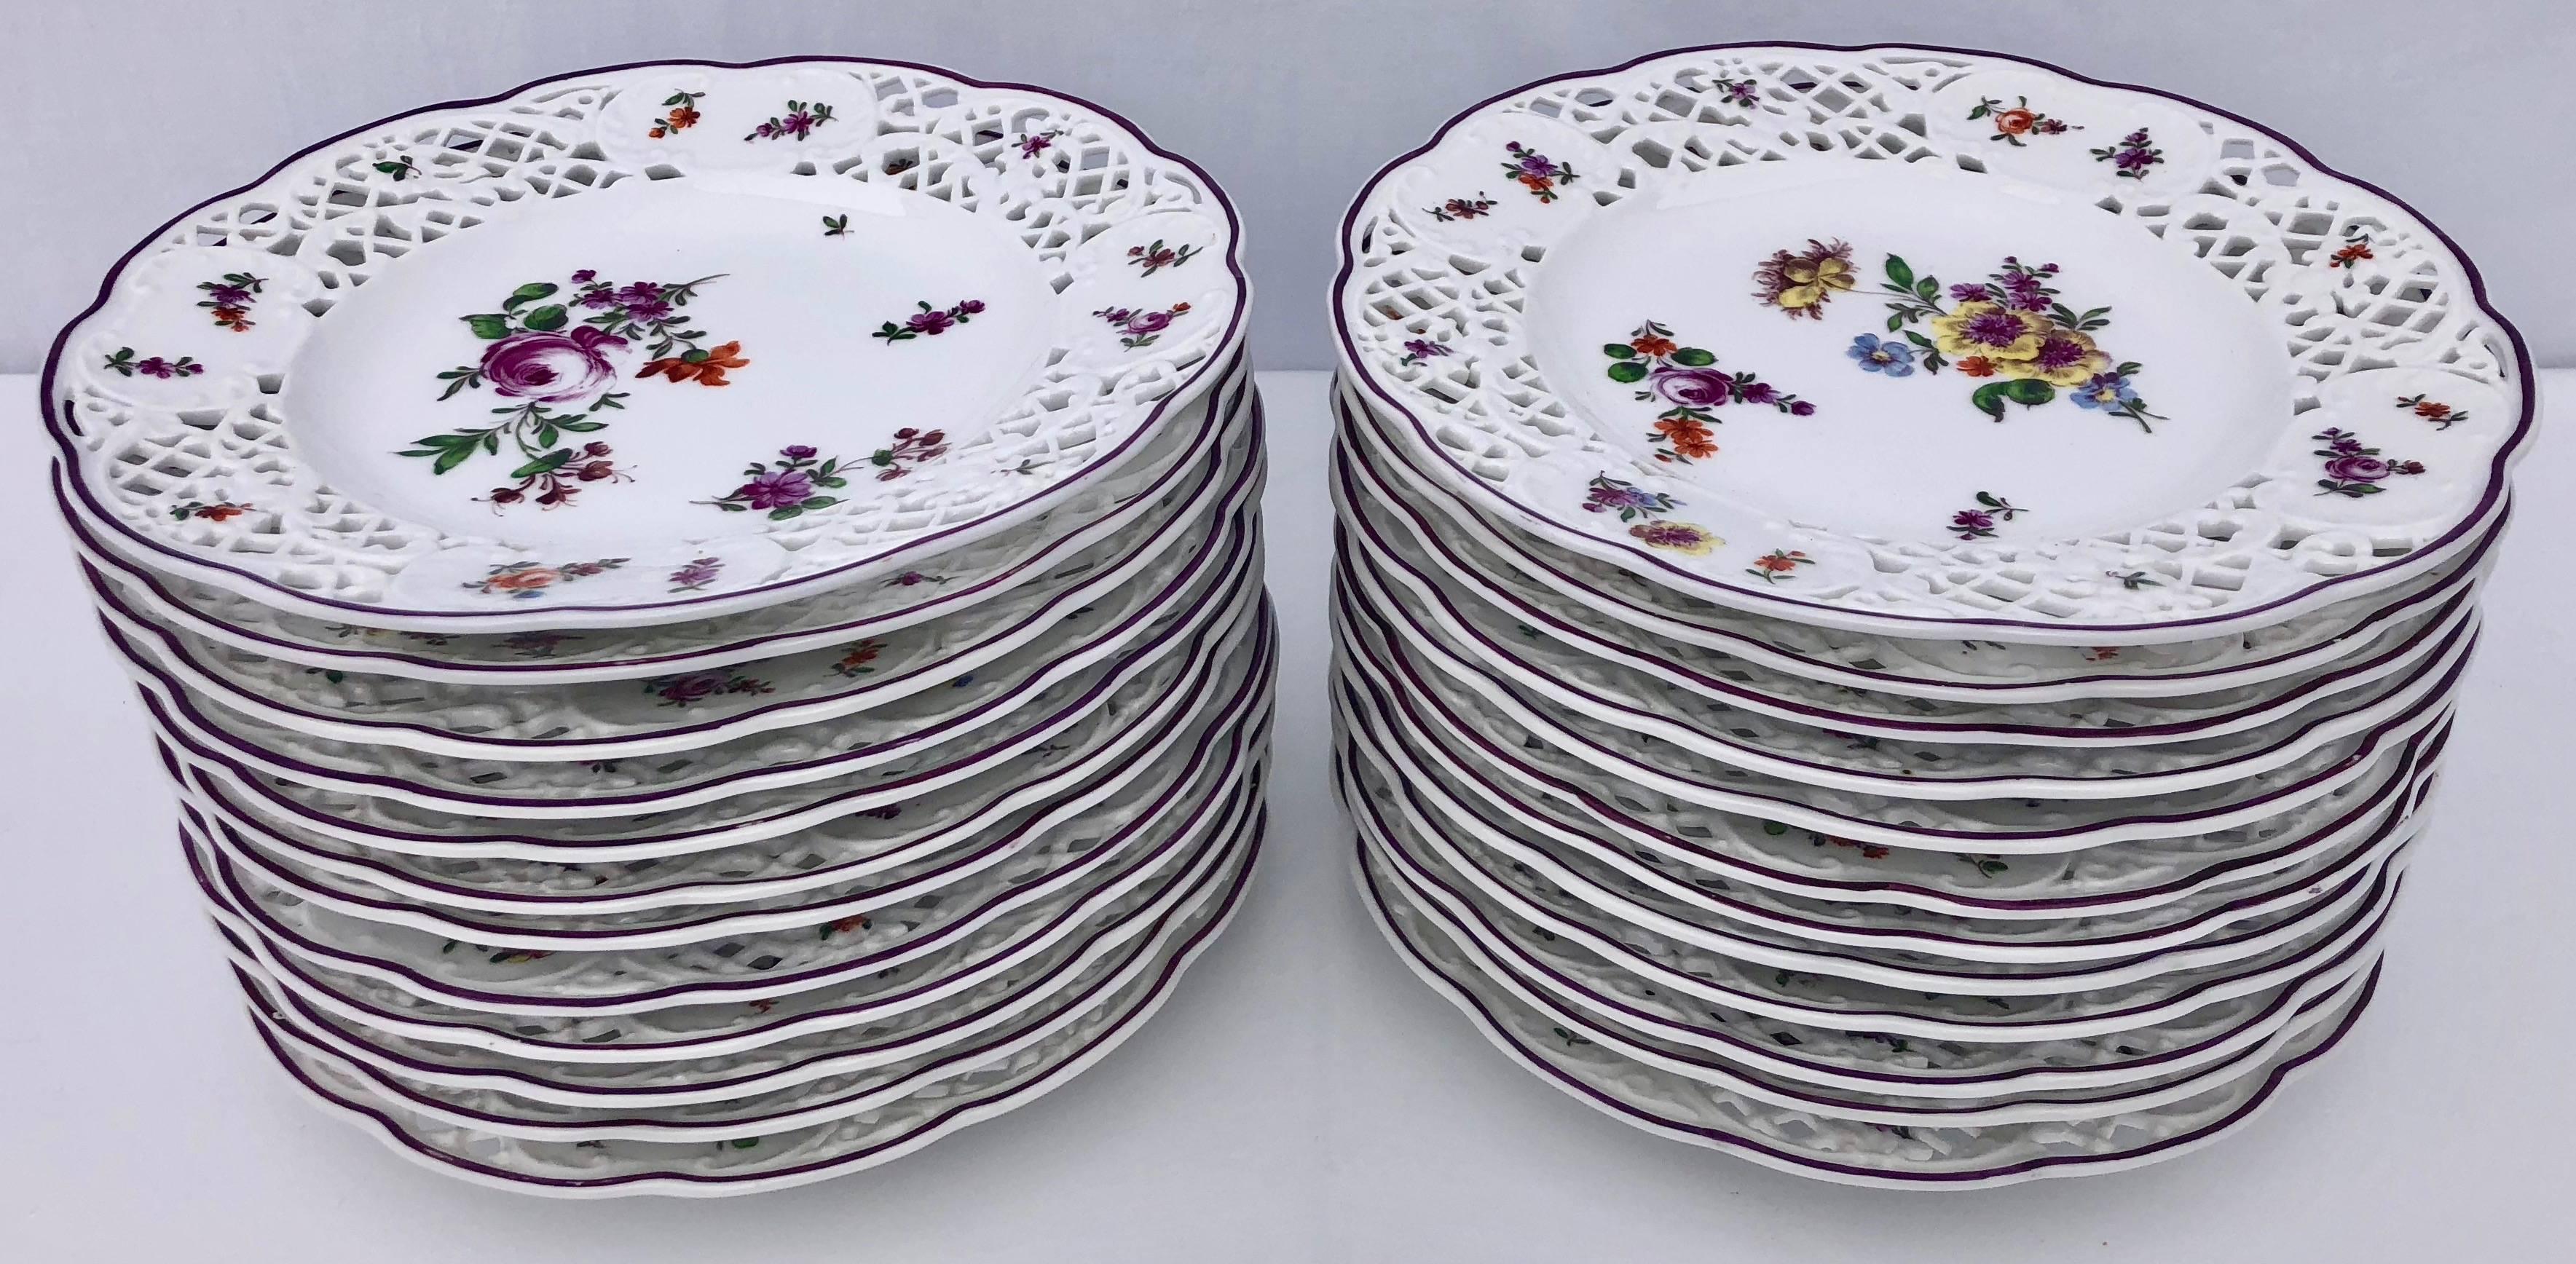 20th Century 24 Meissen Plates with Reticulated Borders and Floral Decoration, Early 1900s For Sale